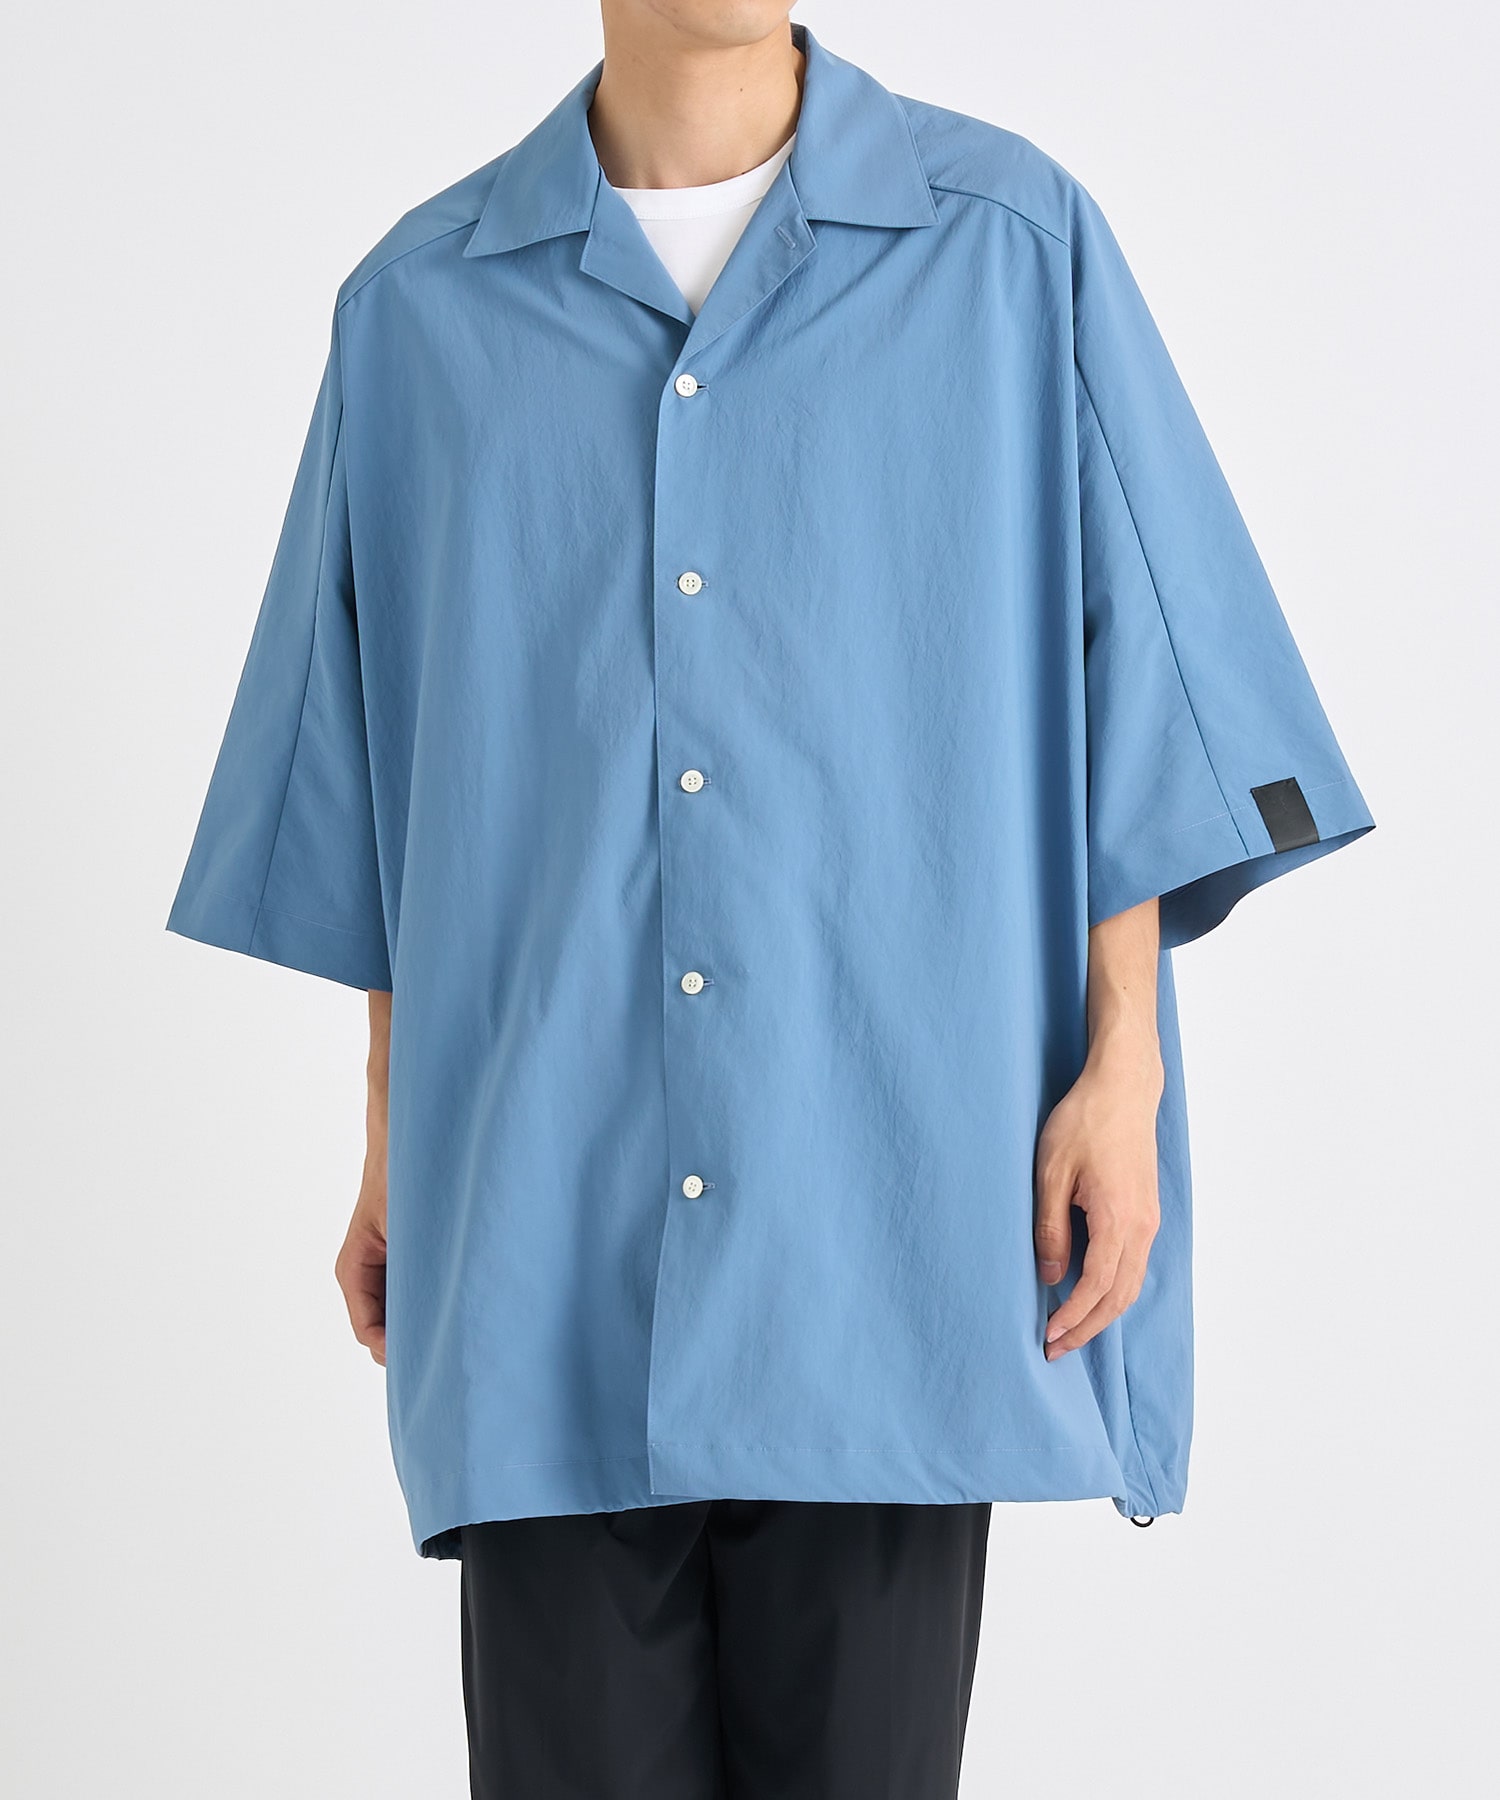 Open Collar Over Size S/S SH PE